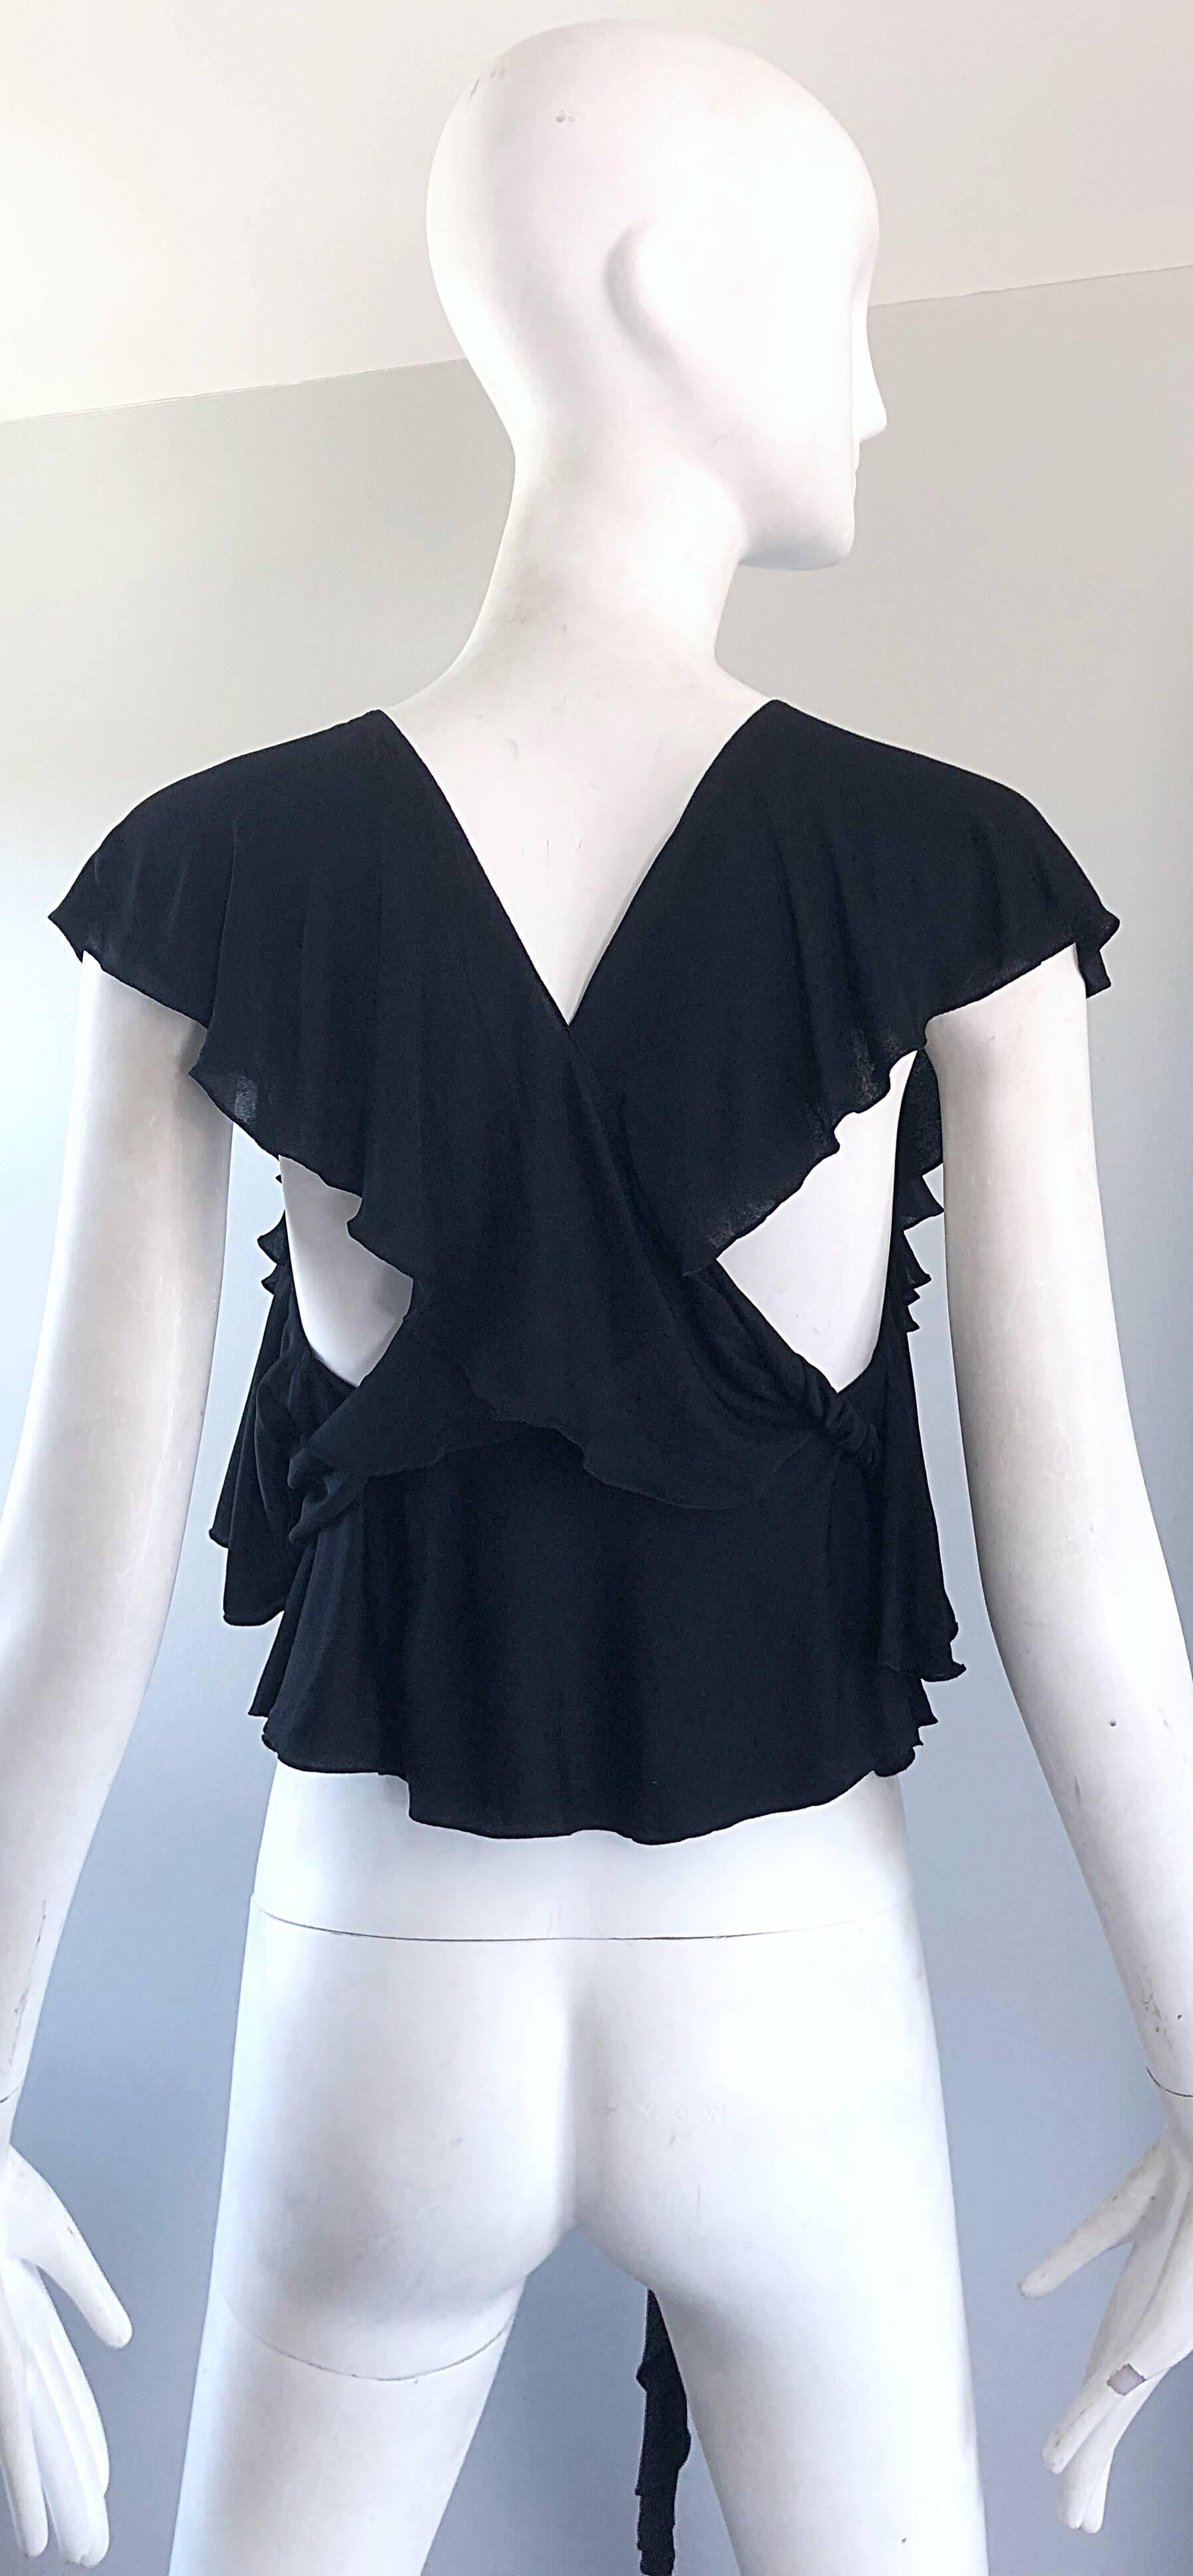 Rare early label vintage 1970s HOLLY'S HARP black silk jersey boho wrap top! Features a stretch silk jersey with a unique innovative style. Wraps over the shoulders into a racerback, then ties around the waist. An amazing take on a halter top! Can